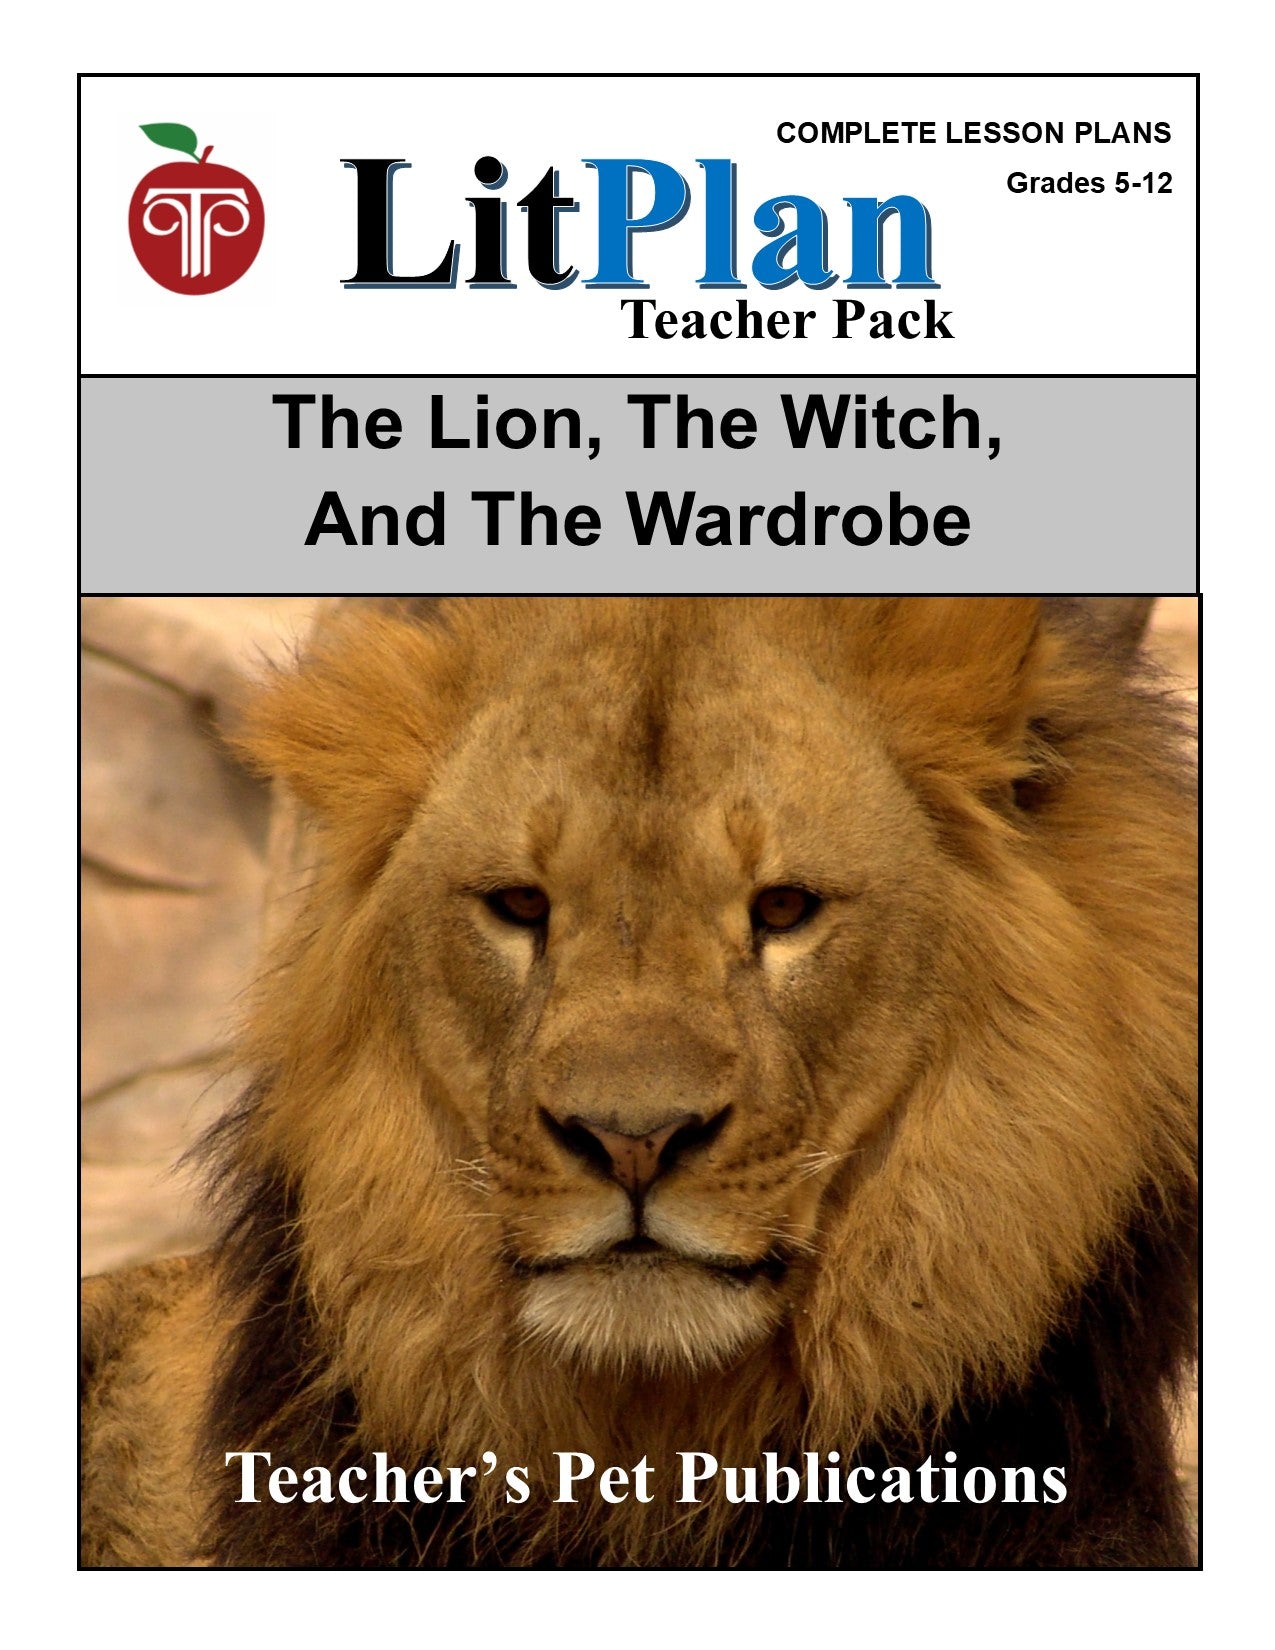 The Lion, the Witch and the Wardrobe: LitPlan Teacher Pack Grades 5-12